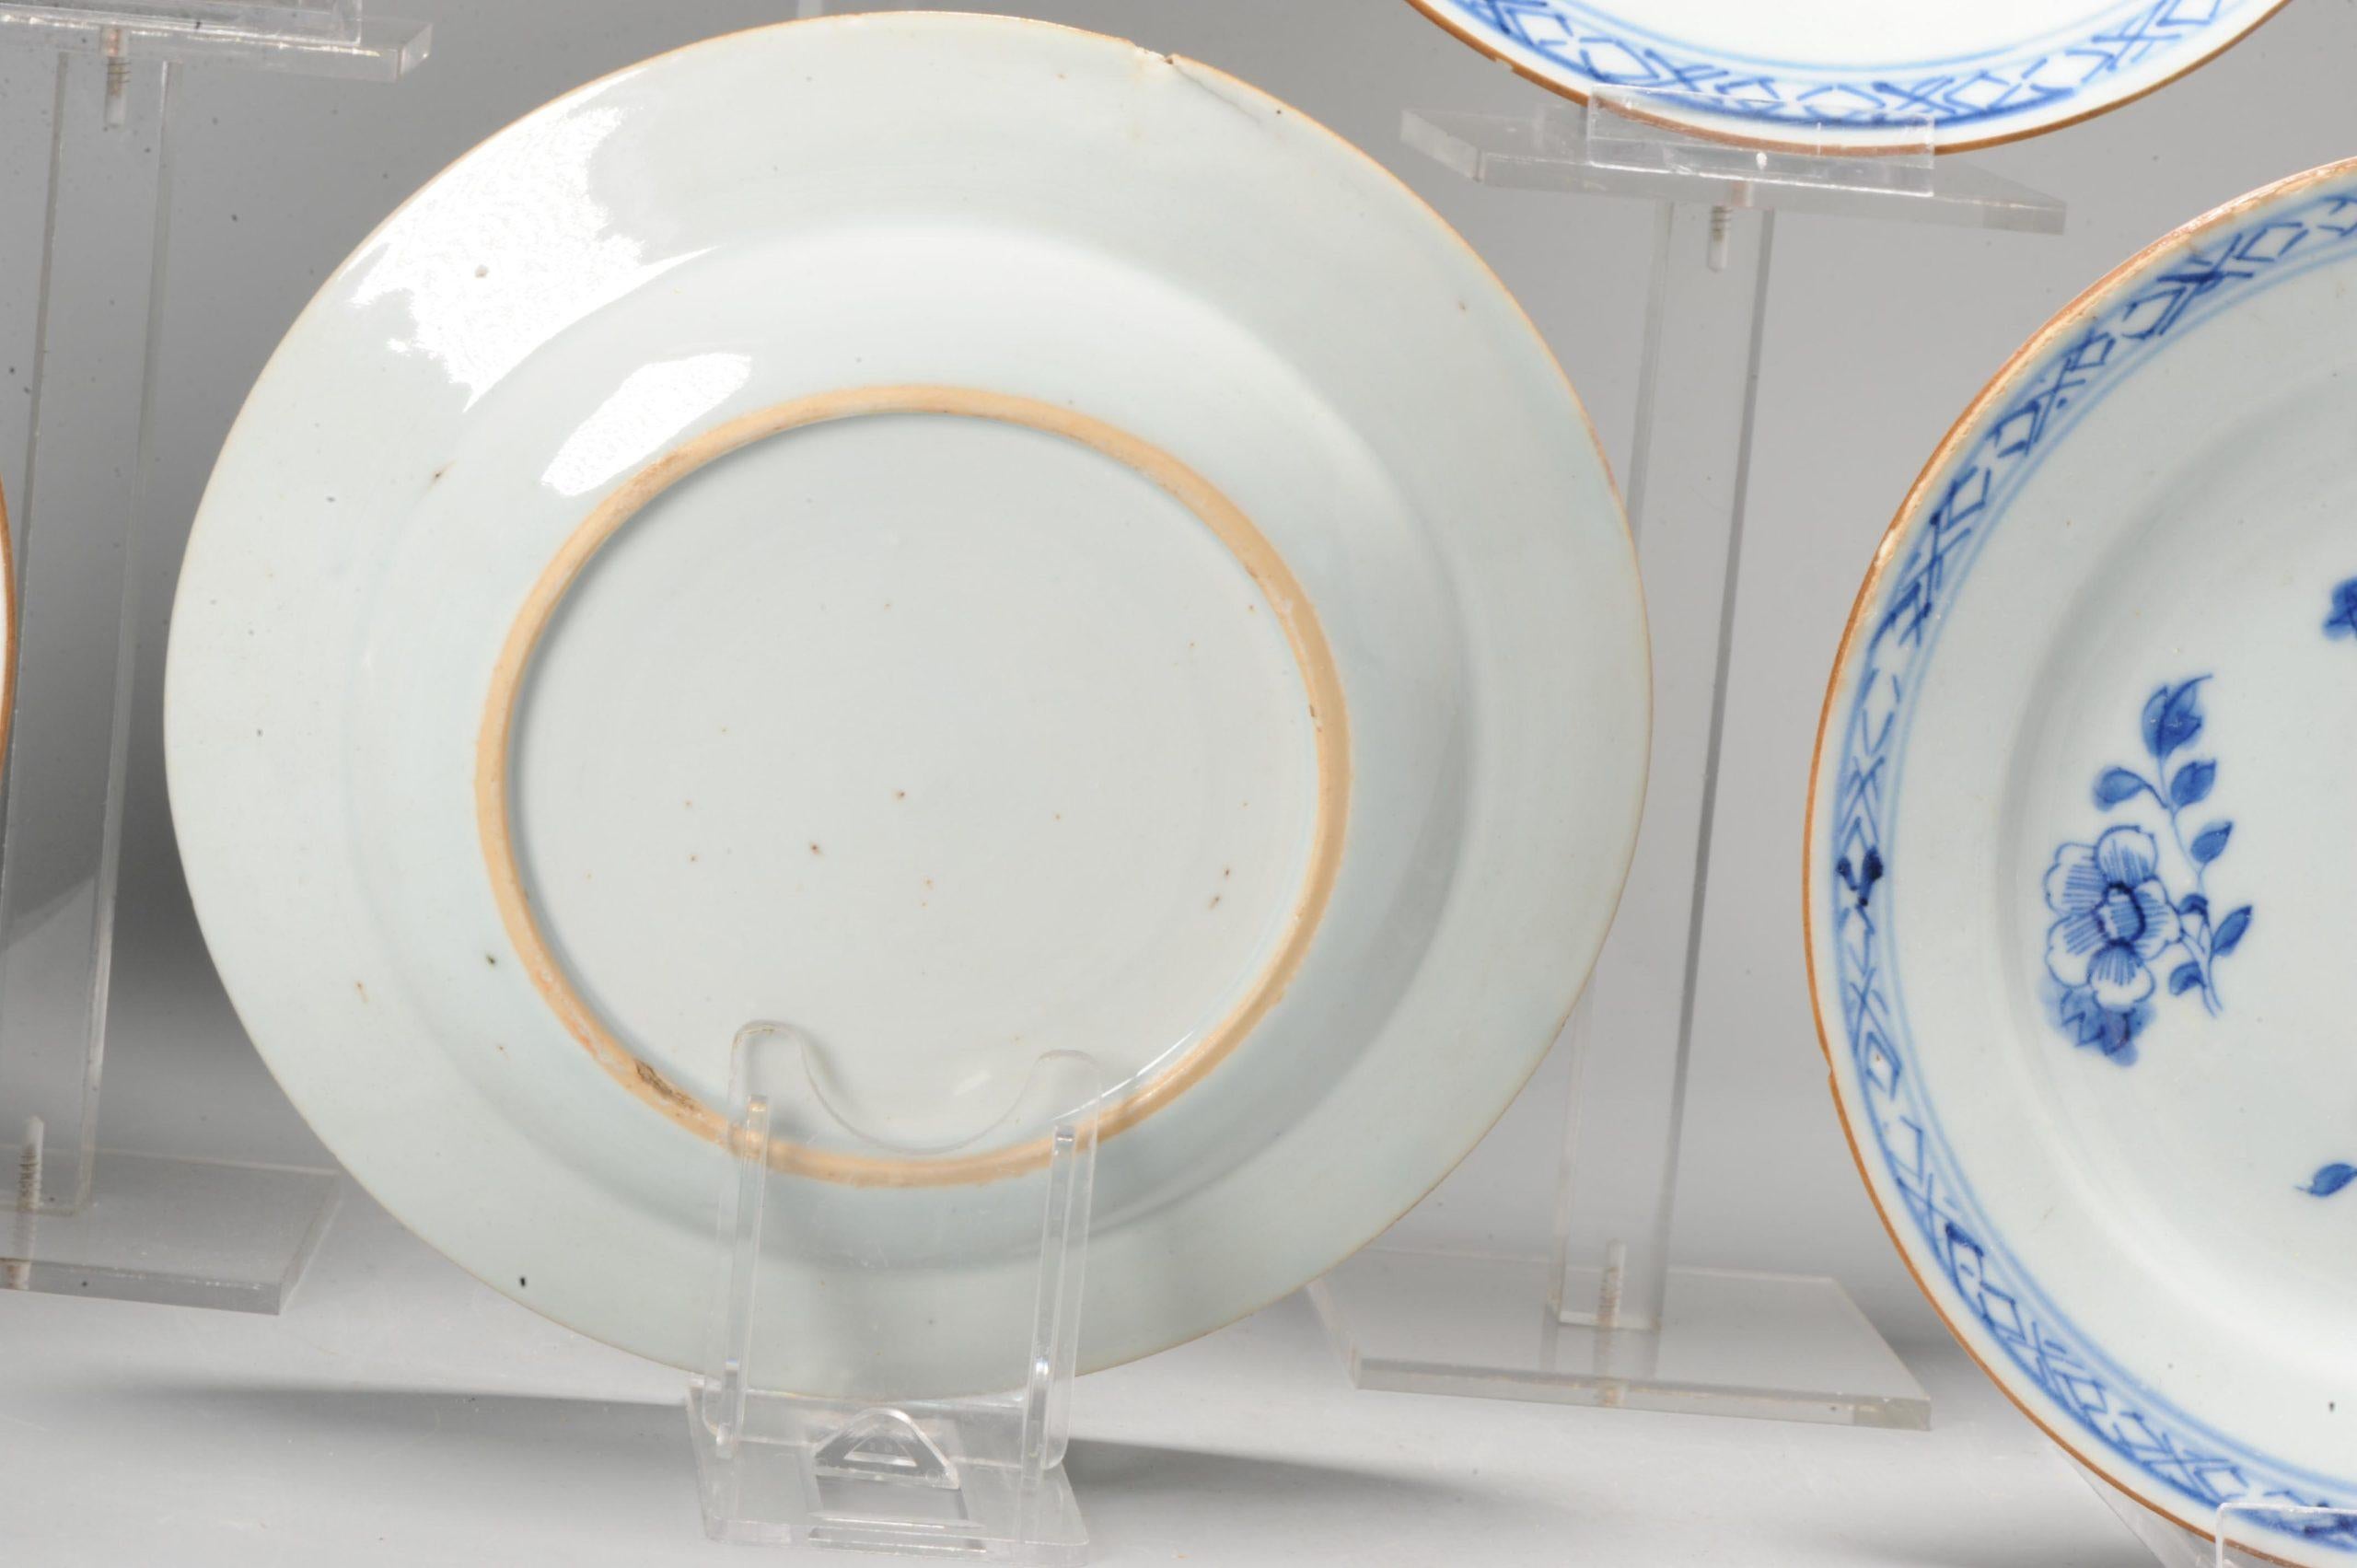 A very nicely decorated SET of 6 dishes in Blue and white, Kangxi/Yongzheng Period. Decorated with flowers.

Additional information:
Material: Porcelain & Pottery
Color: Blue & White
Region of Origin: China
Emperor: Kangxi (1661-1722), Yongzheng